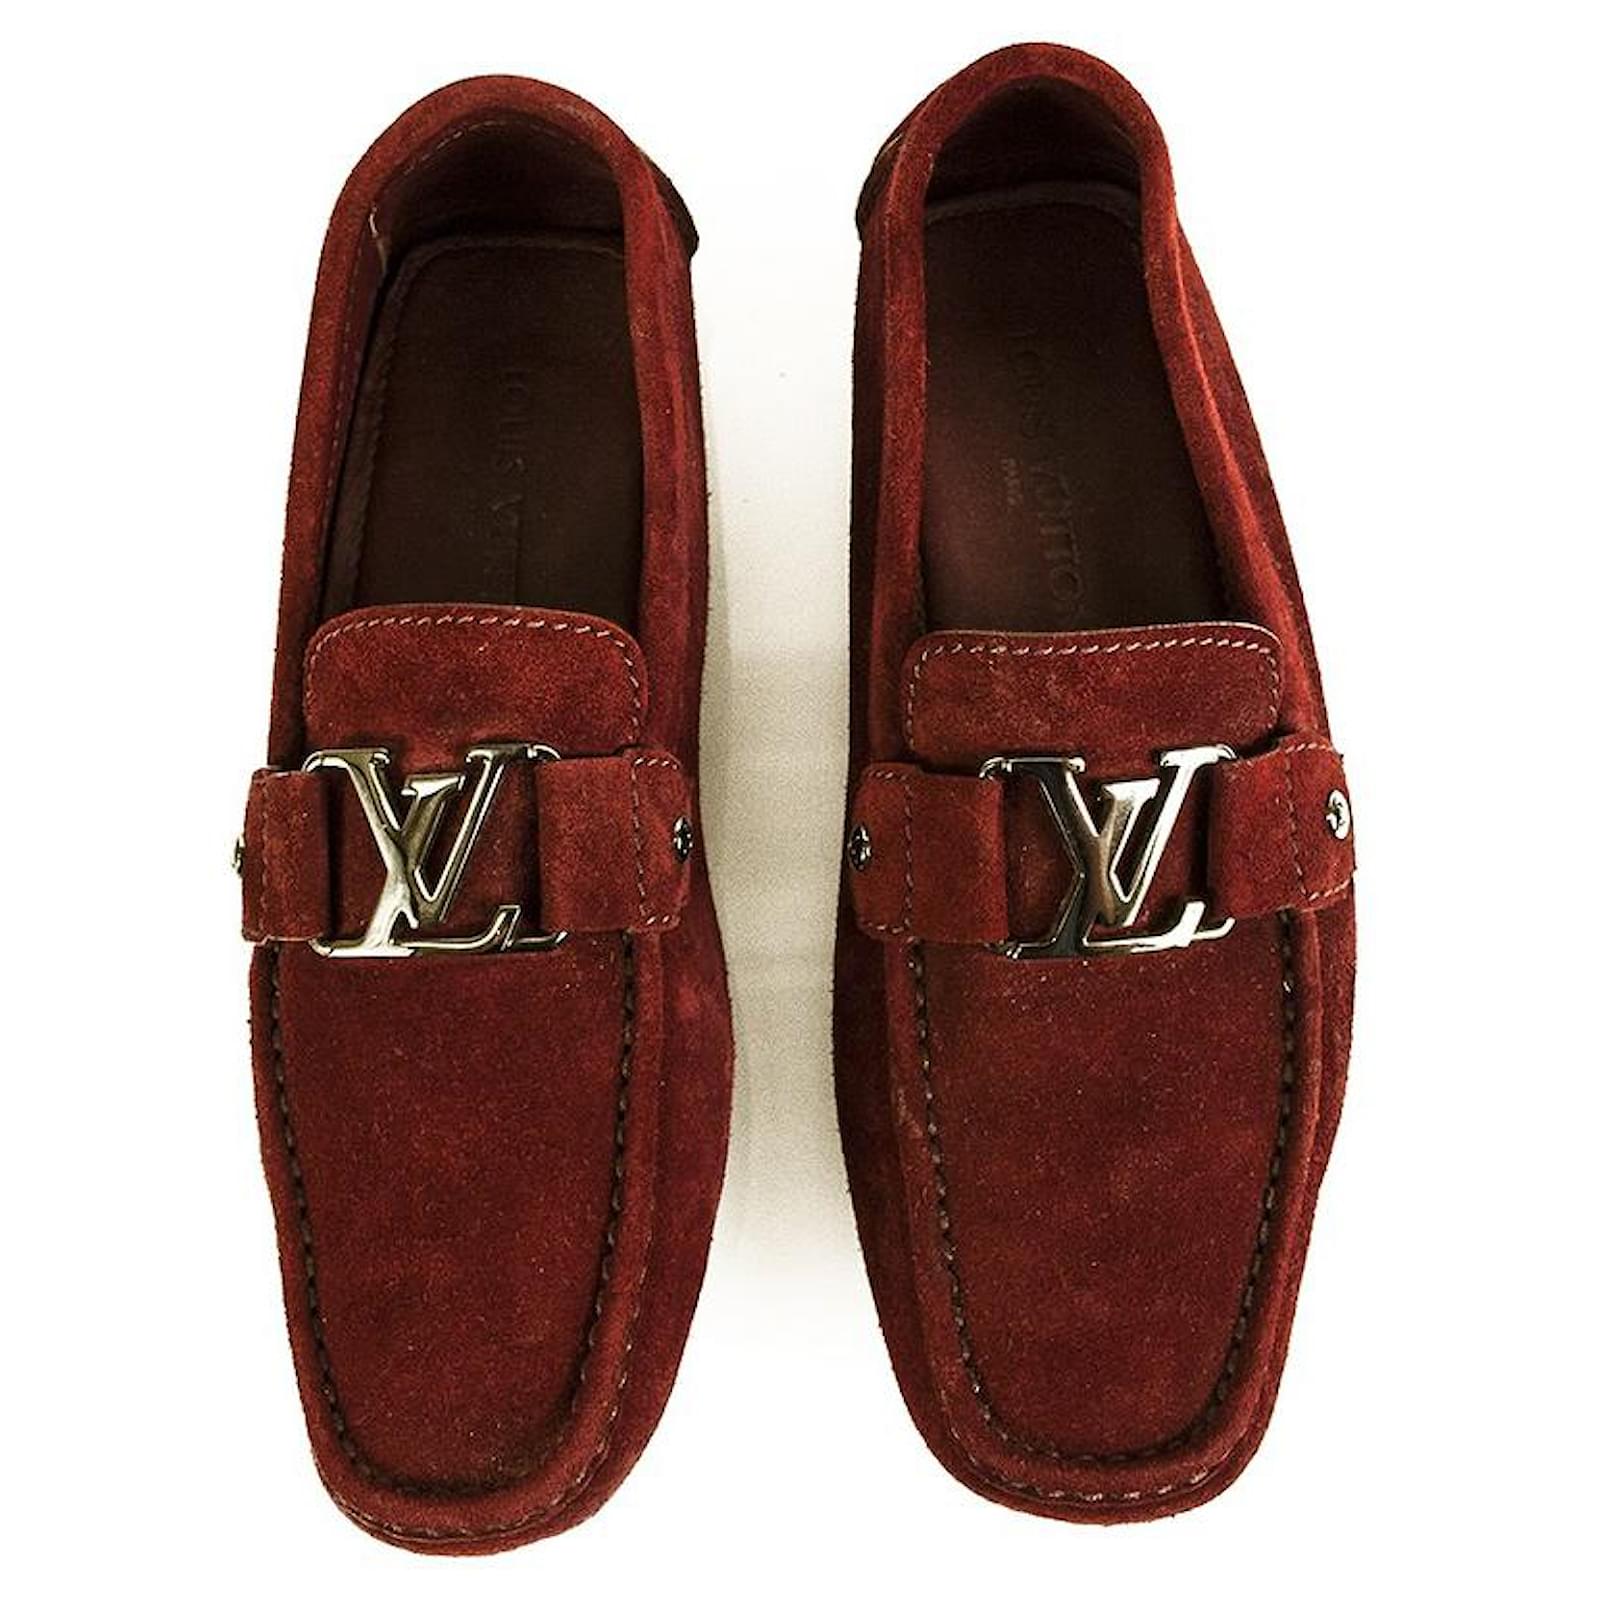 Louis Vuitton Men's Red Leather Monte Carlo Car Shoe Loafer